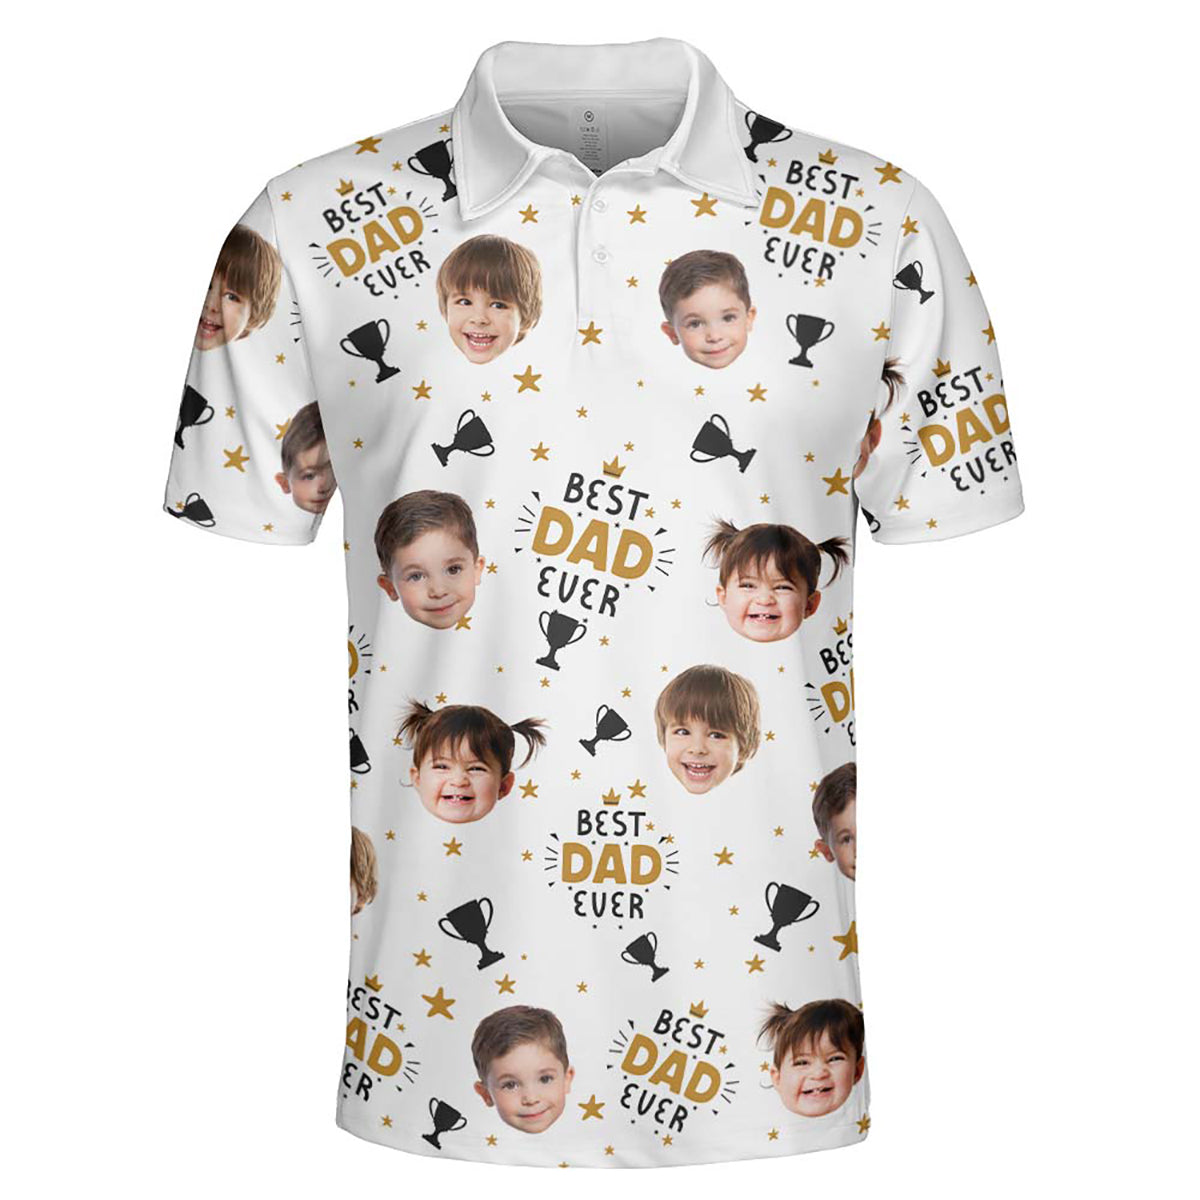 Personalized Photo Polo Shirt - Best Dad Ever